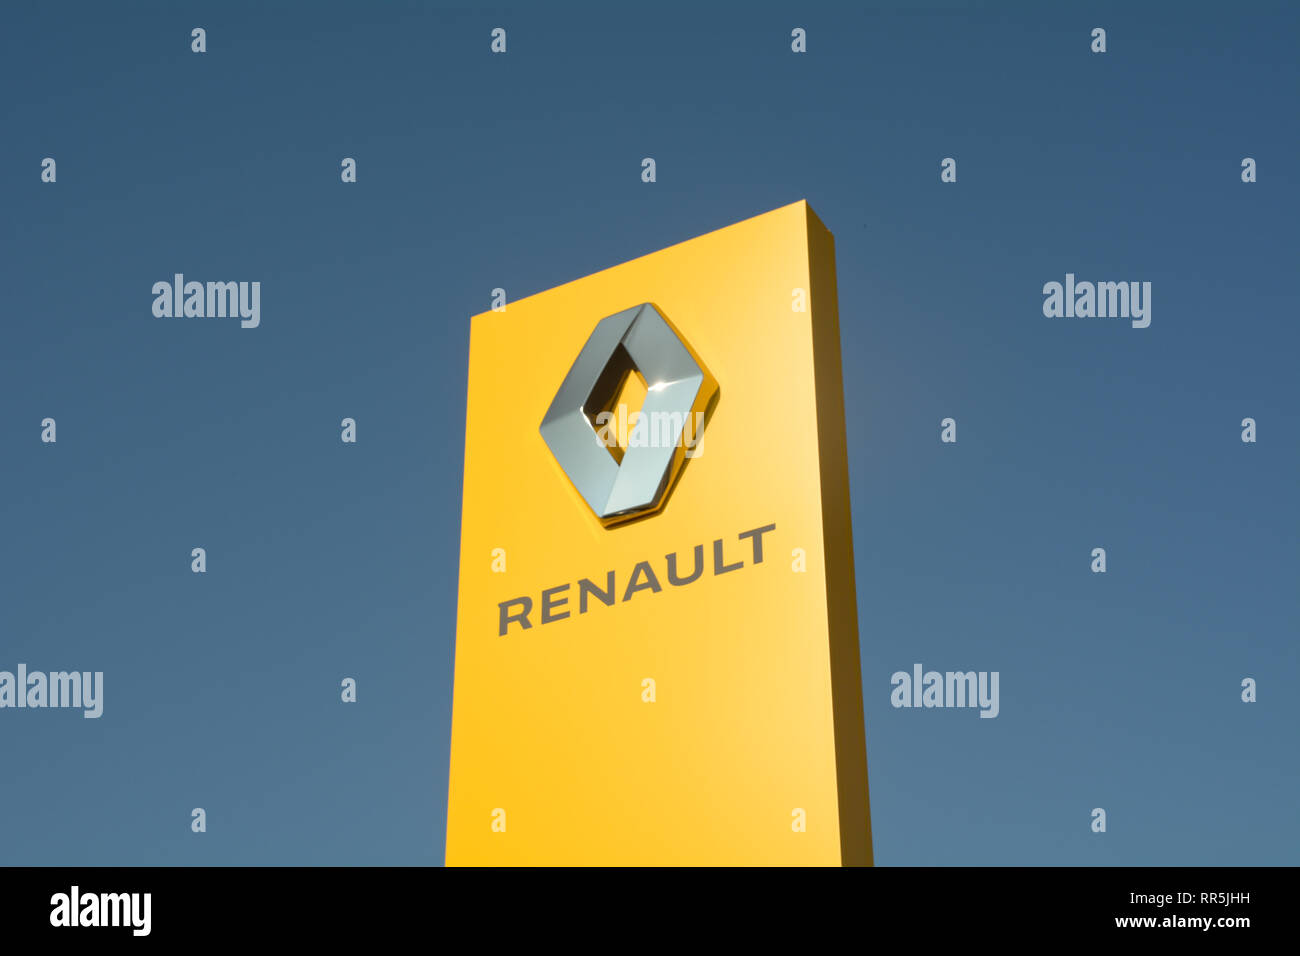 Renault car logo sign - yellow with blue sky background Stock Photo